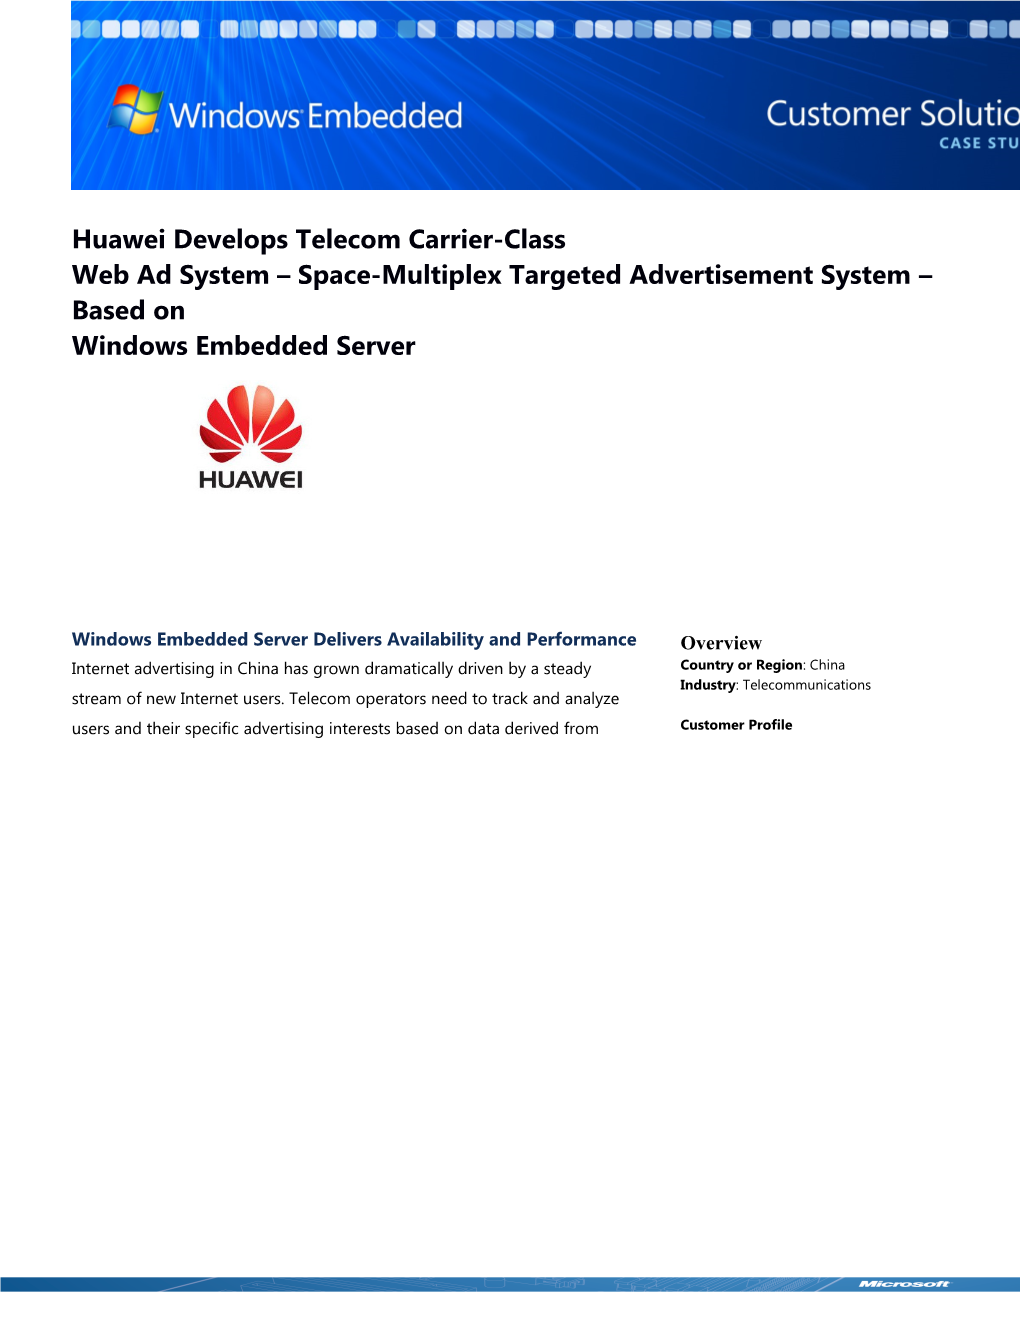 Metia Windows Embedded Huawei Develops Carrier-Class Web Advertising System Based on Windows